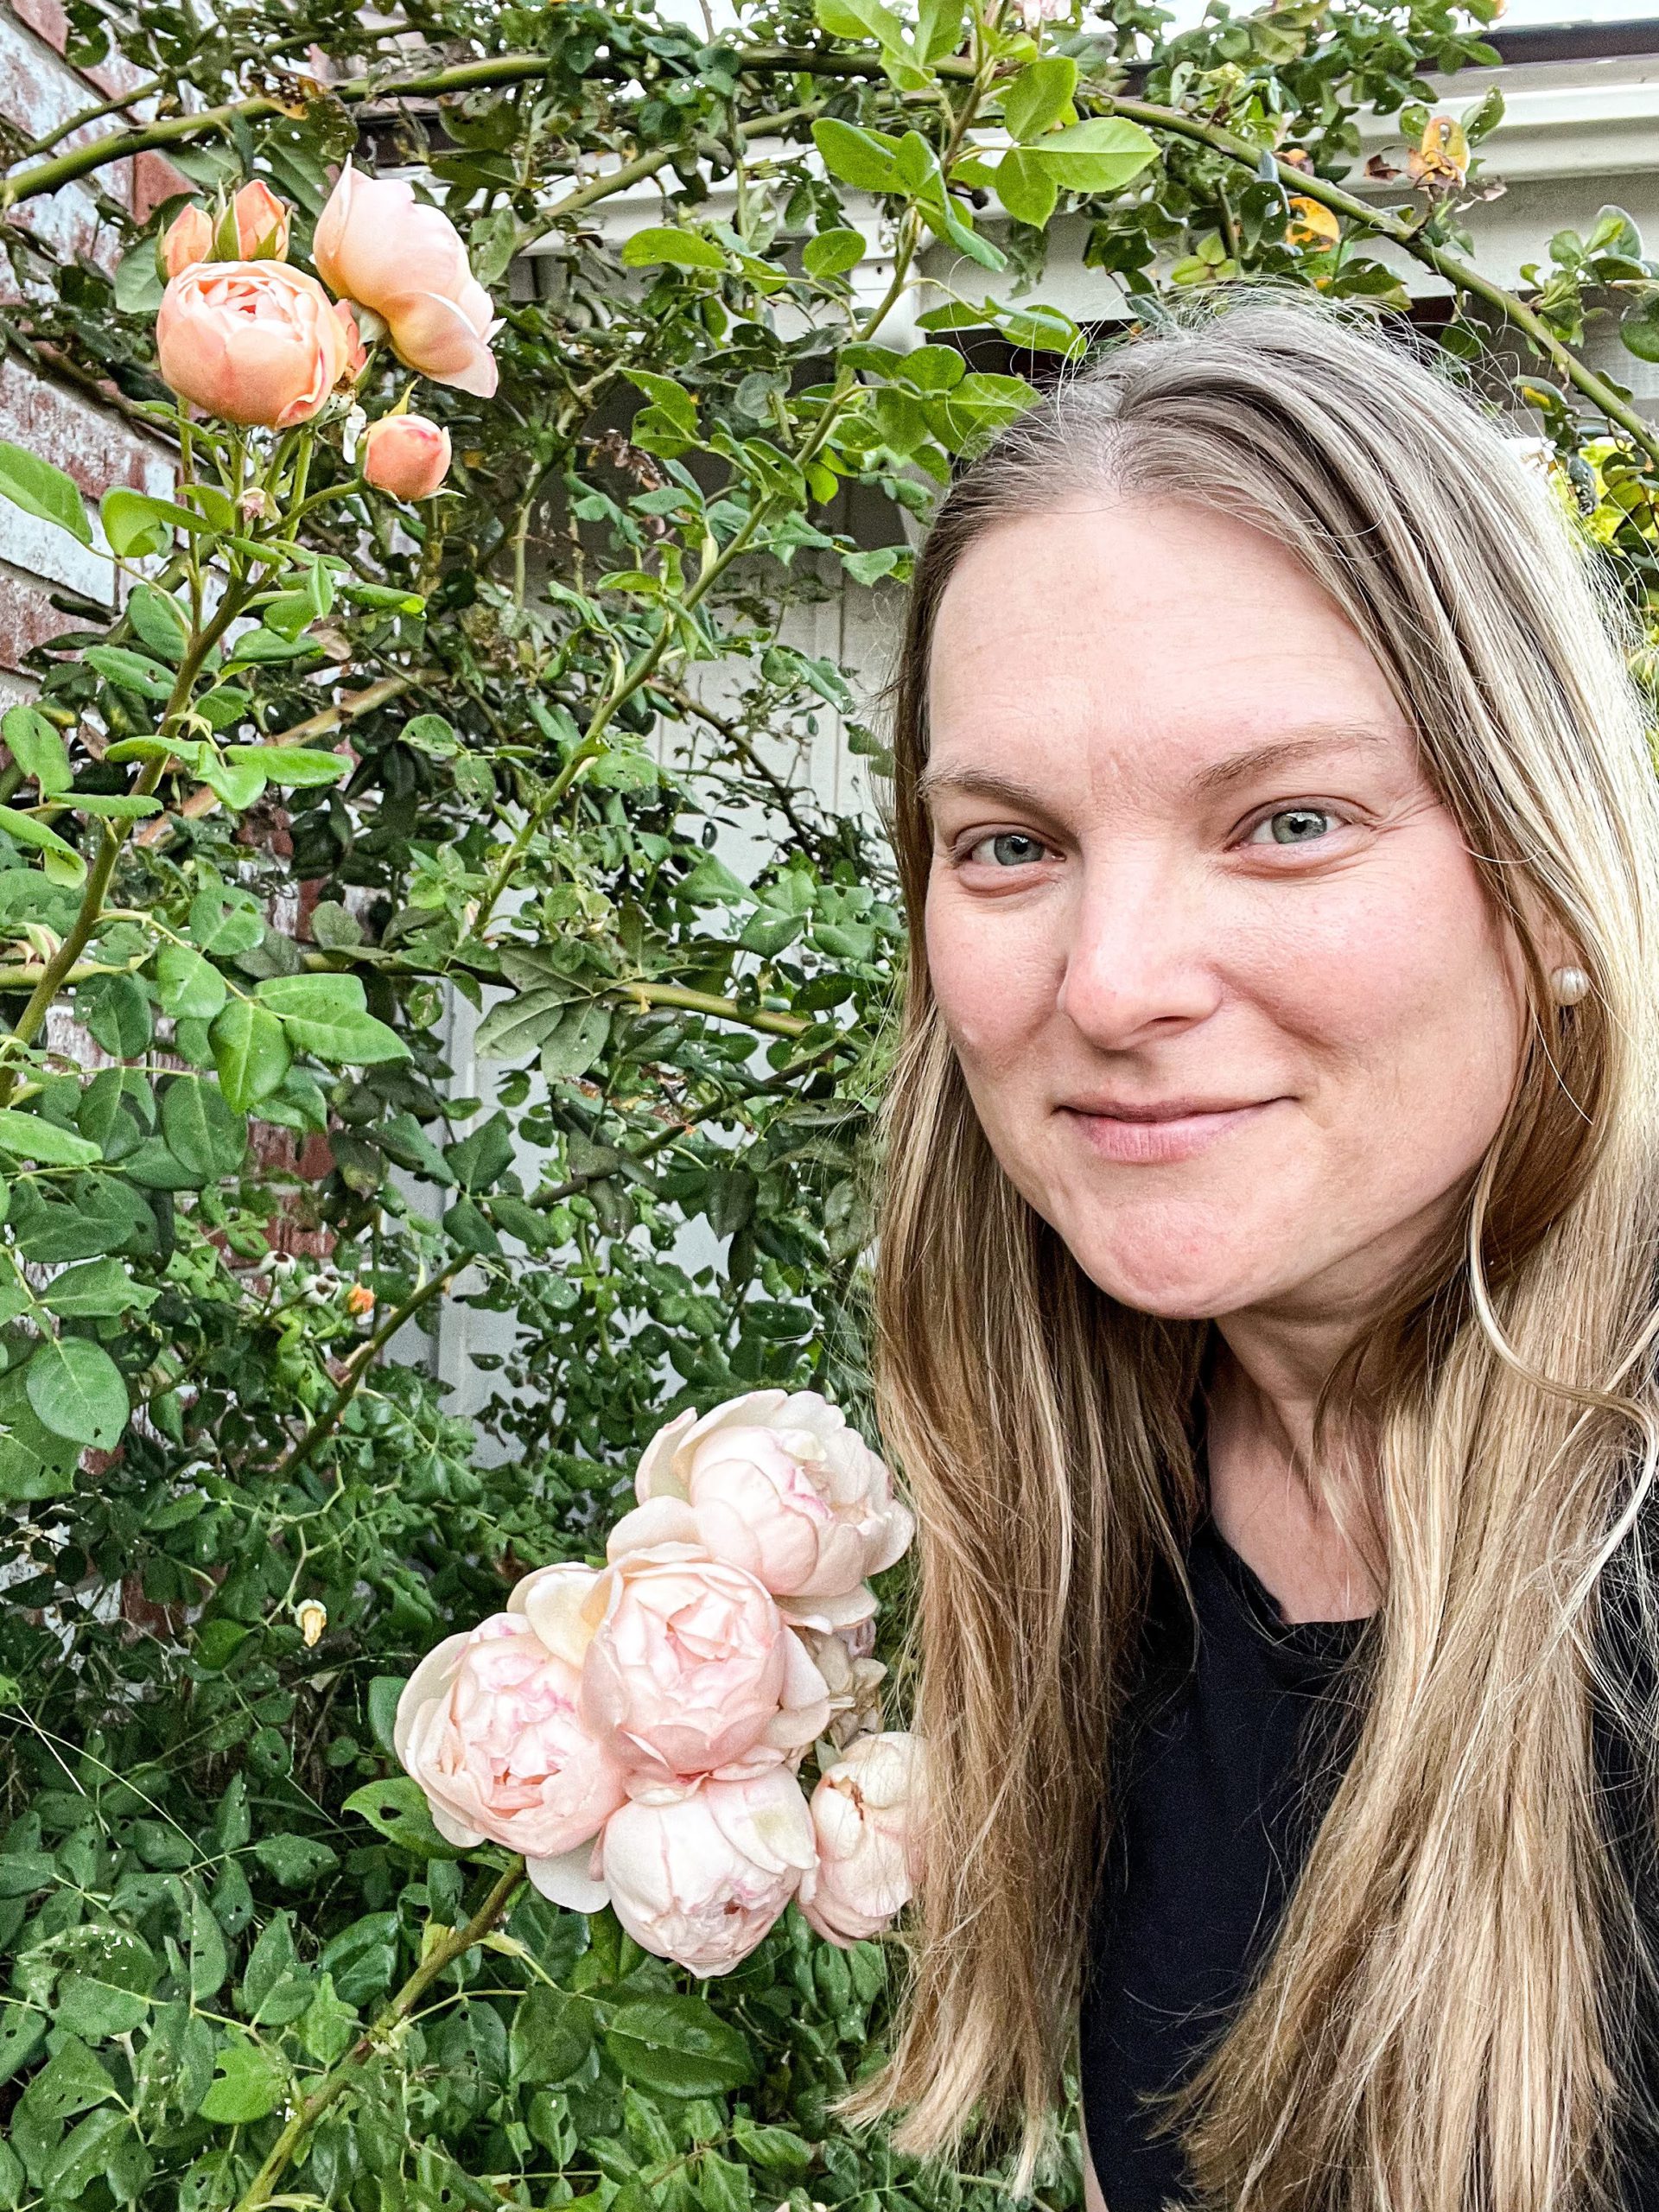 A blonde, white woman with long hair smiles with her mouth closed next to a few clusters of peach roses.